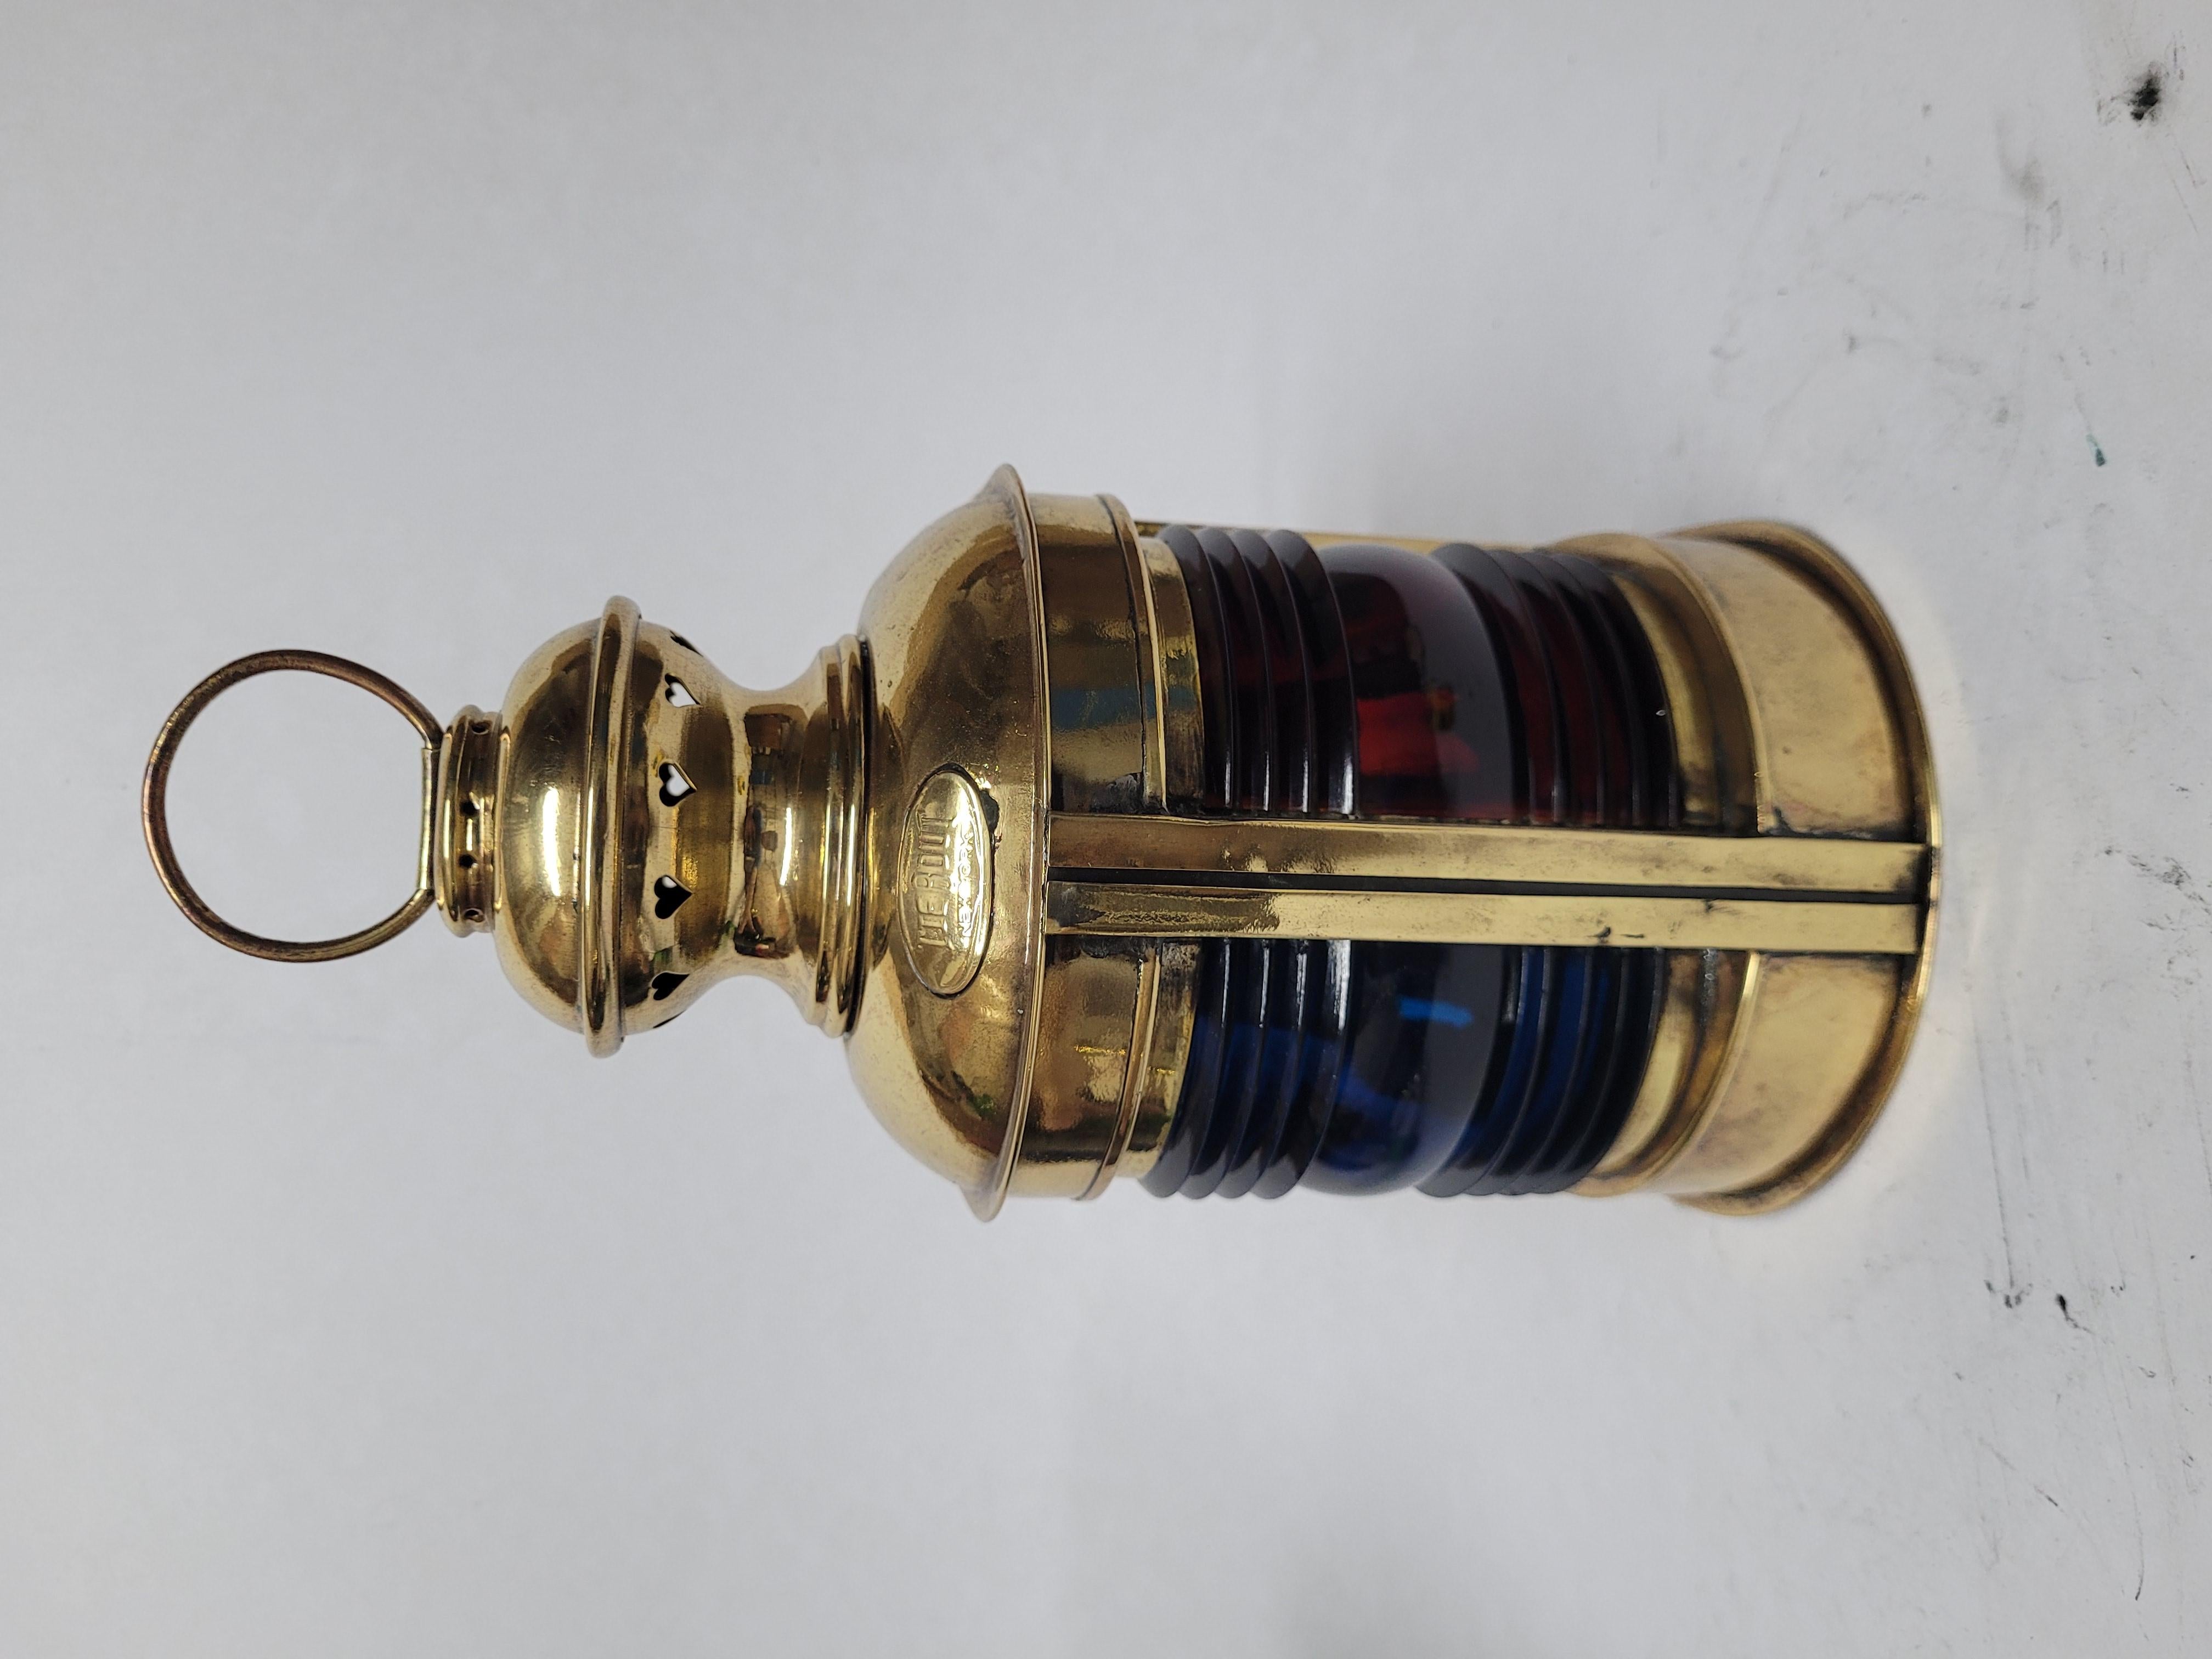 Bow lantern from a boat with red and blue fresnel glass lenses. Embossed brass makers tag from Tiebout of New York. With oil burner. Vented top and carry handle American Circa 1933

Weight: 1.71 lbs.
Overall Dimensions: 10 1/2